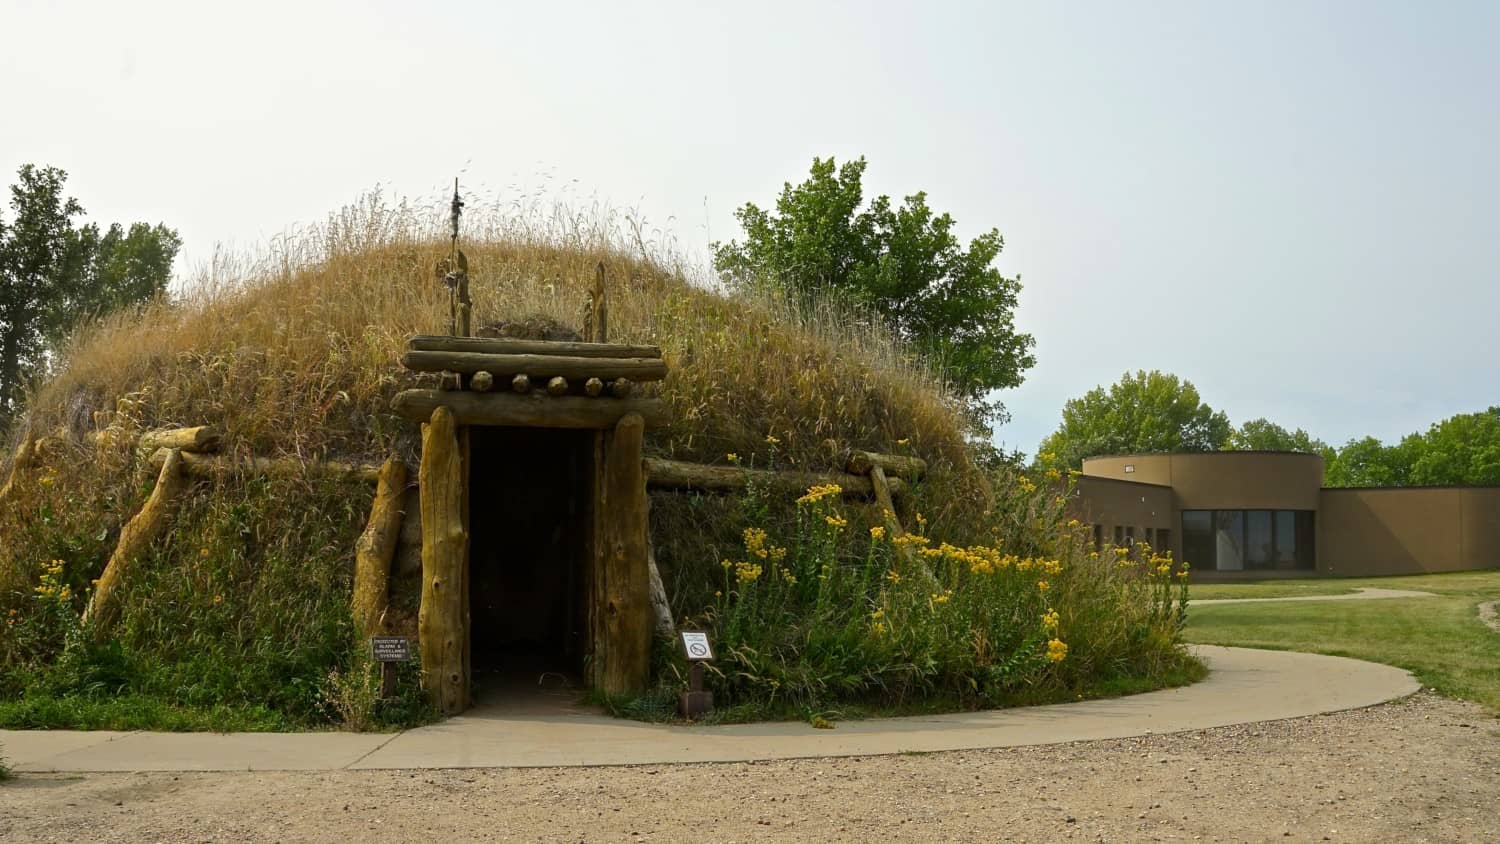 North Dakota's Top Pet Friendly Attraction: Knife River Indian Villages | GoPetFriendly.com